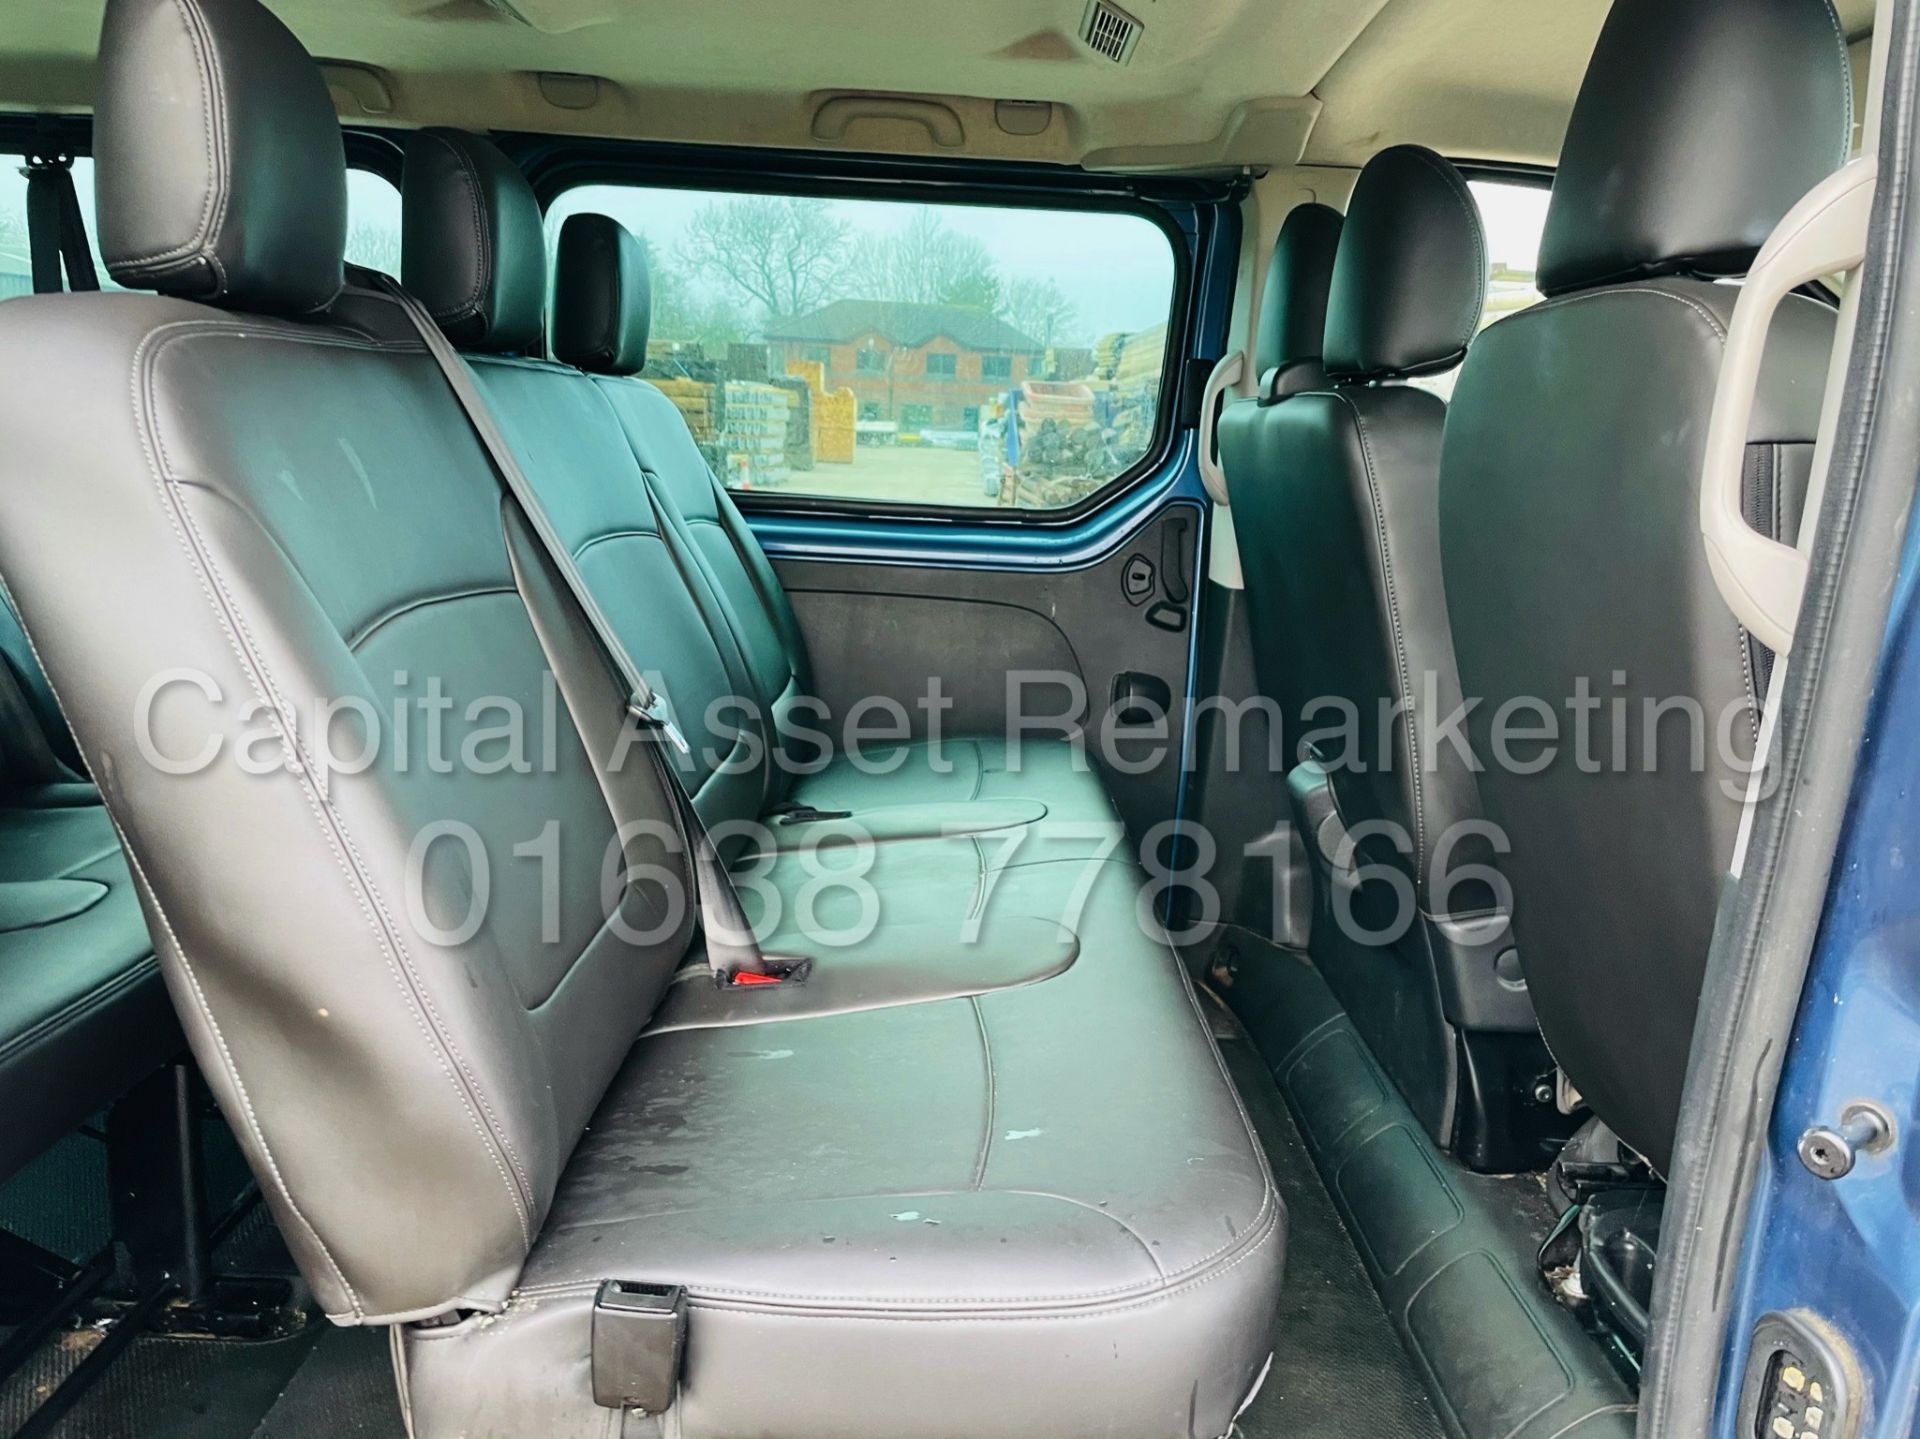 (ON SALE) RENAULT TRAFIC *LWB - 9 SEATER BUS* (2017 - EURO 6) '1.6 DCI - 6 SPEED' *AIR CON* (NO VAT) - Image 30 of 47